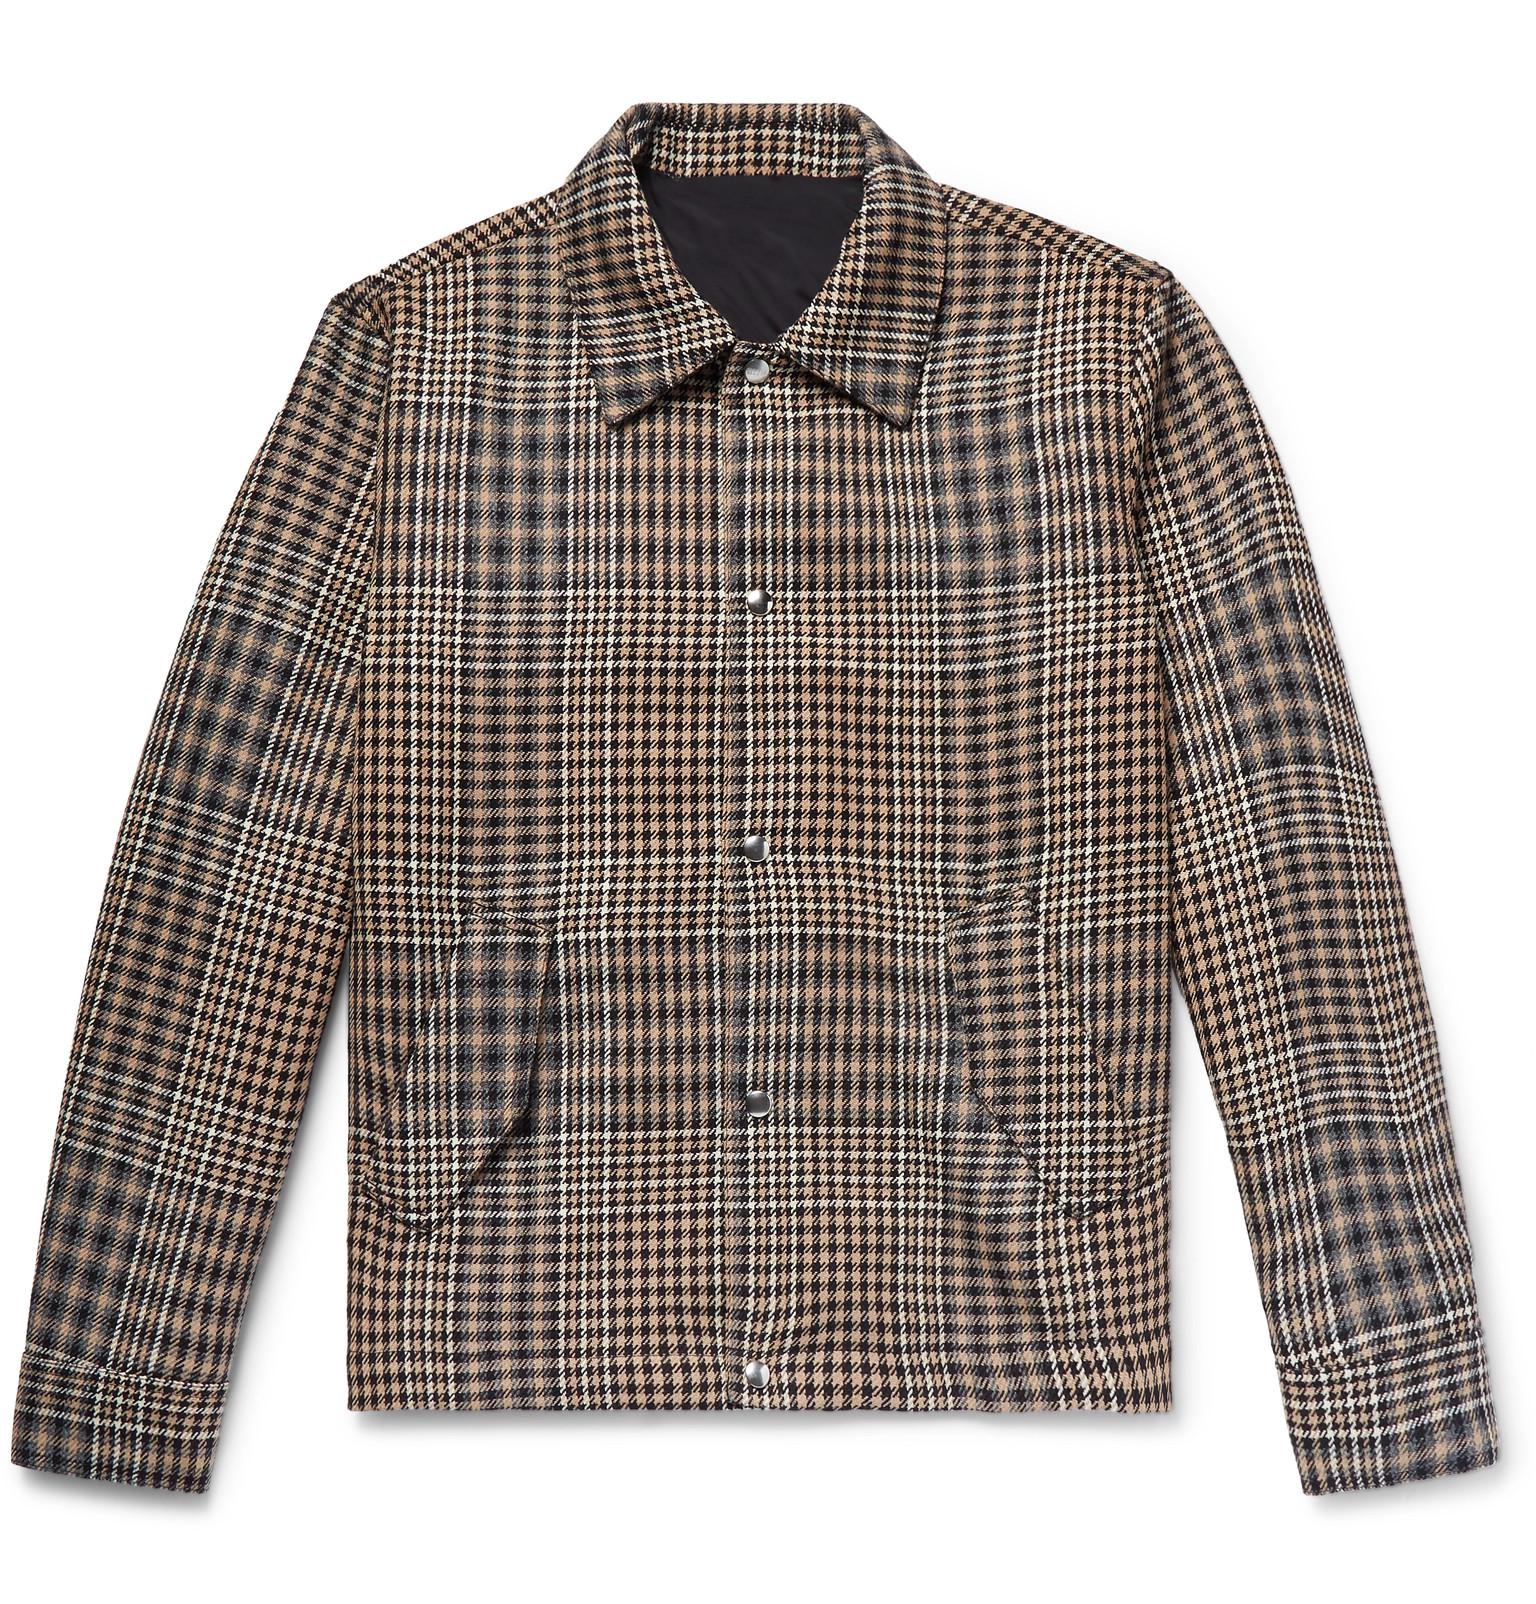 AMI Houndstooth Wool Shirt Jacket in Natural for Men - Lyst